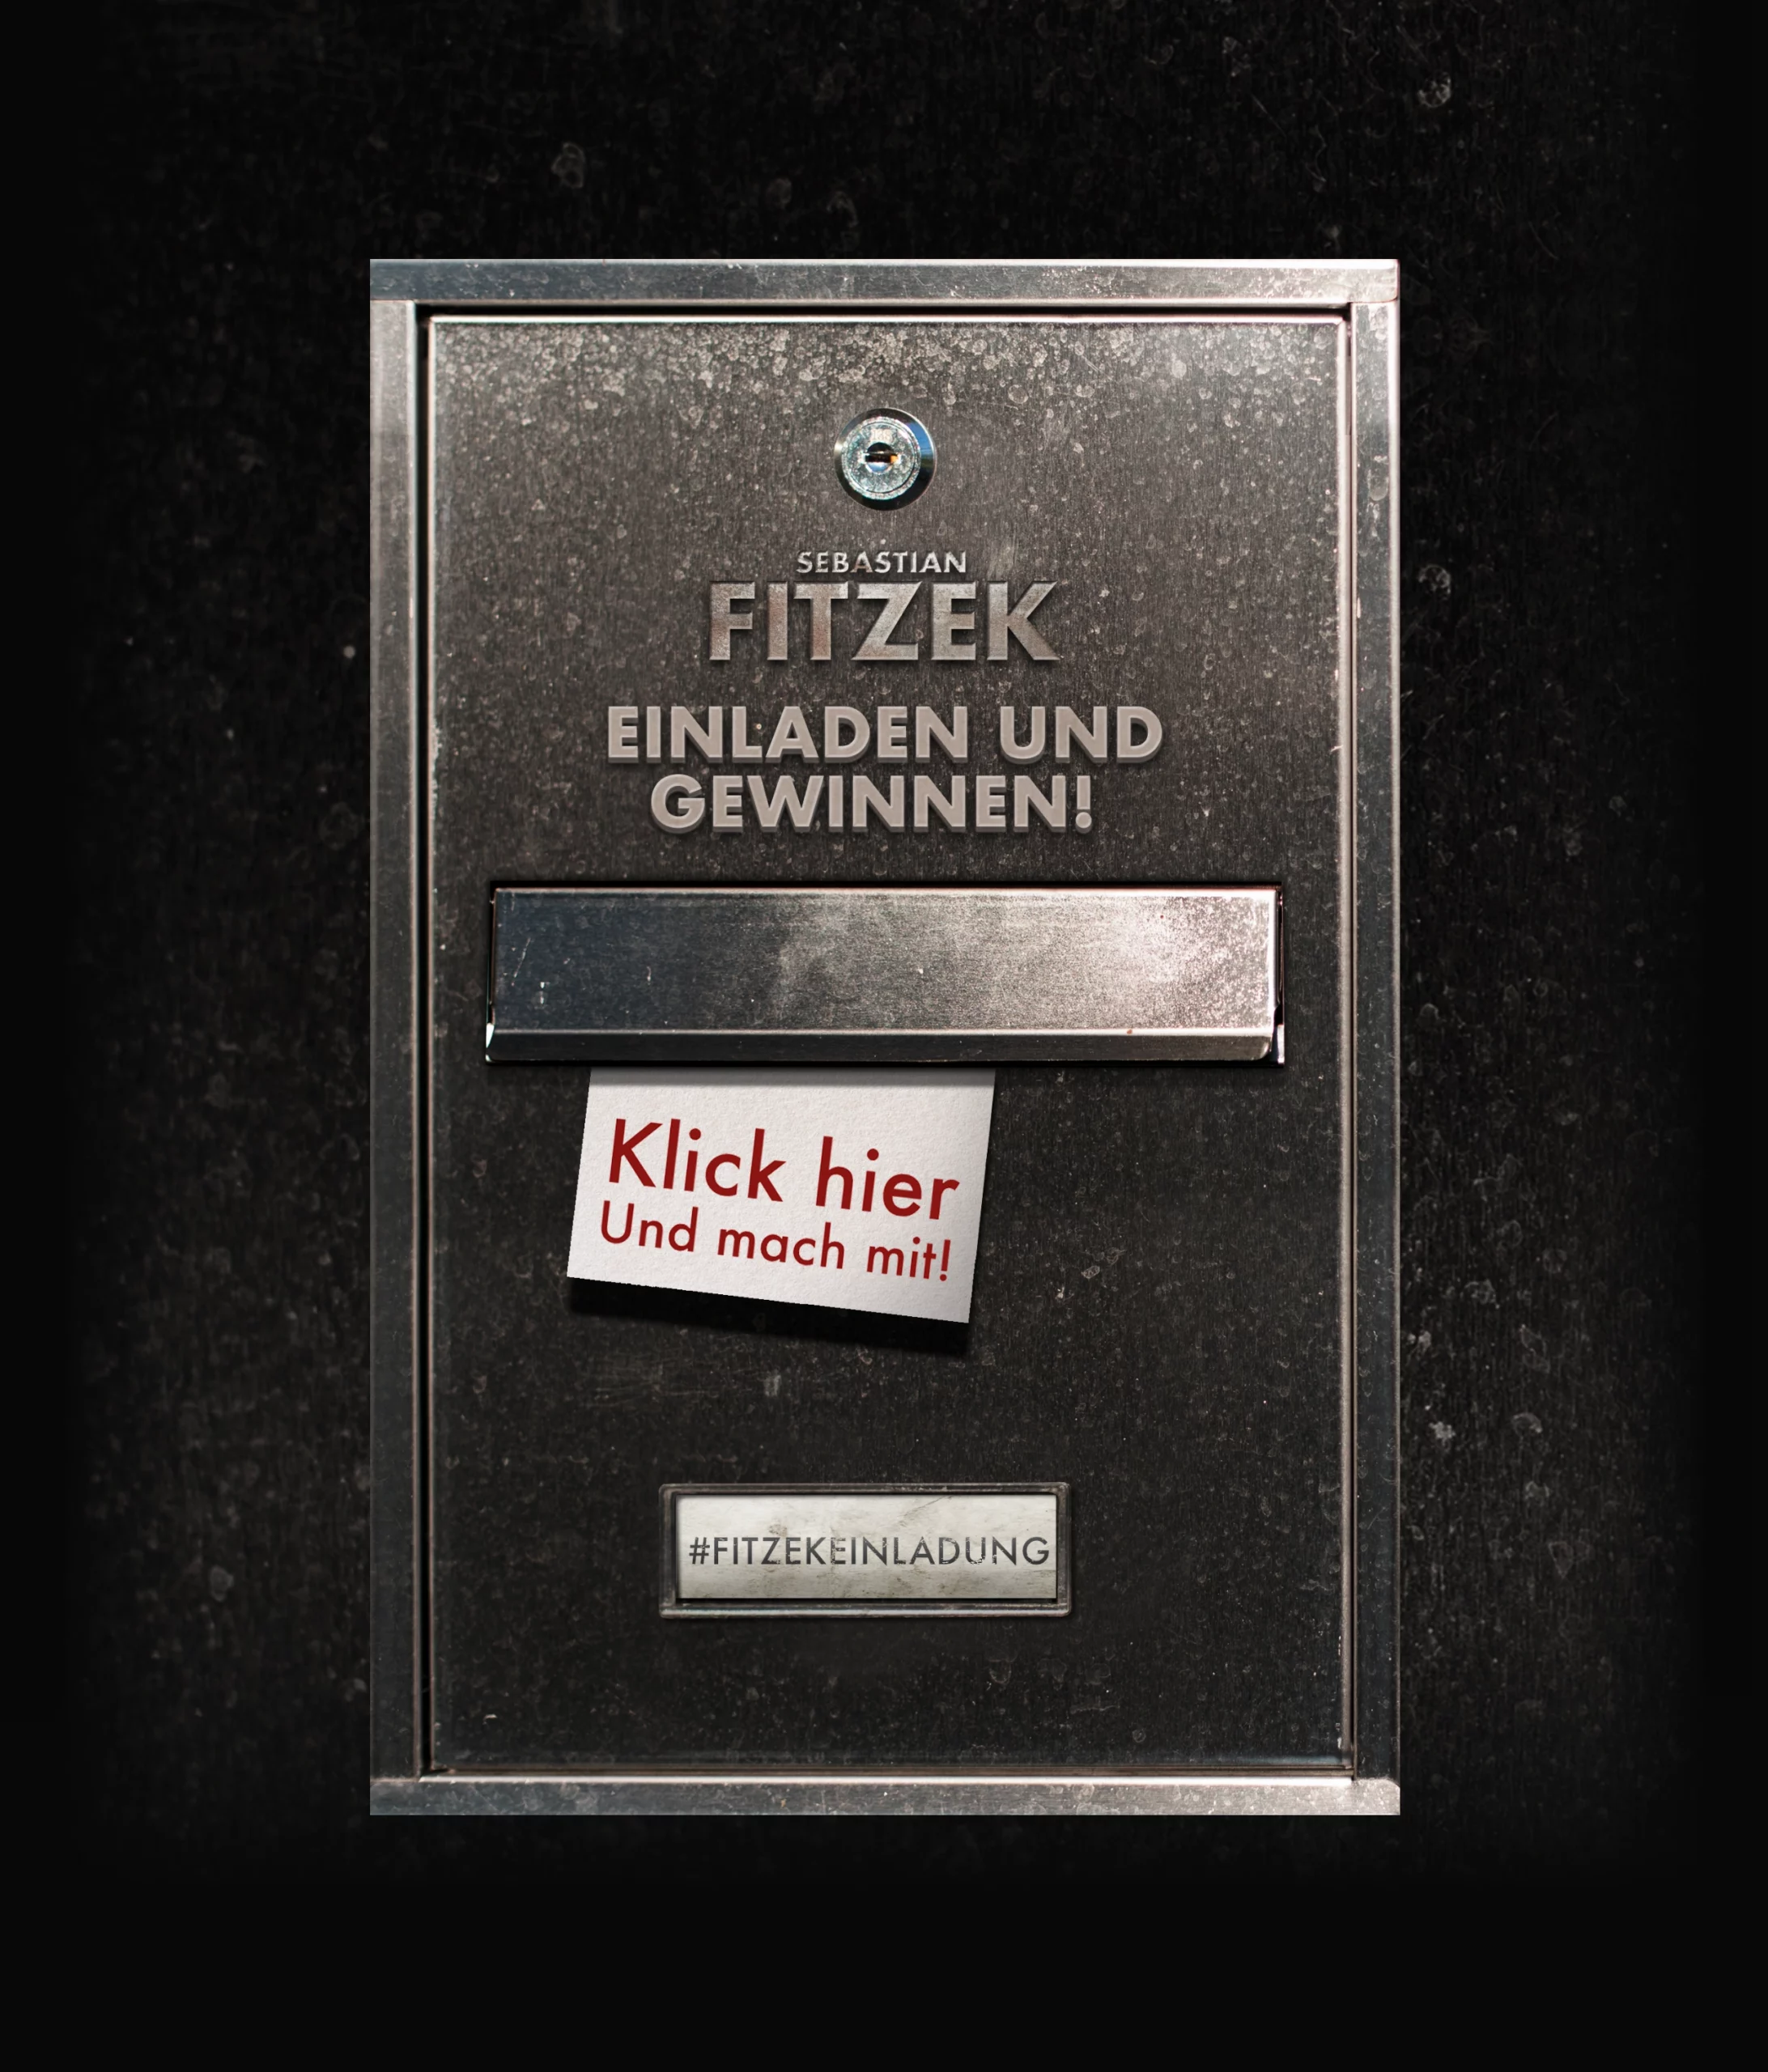 A picture shows the book cover of the invitation by Sebastian Fitzek.